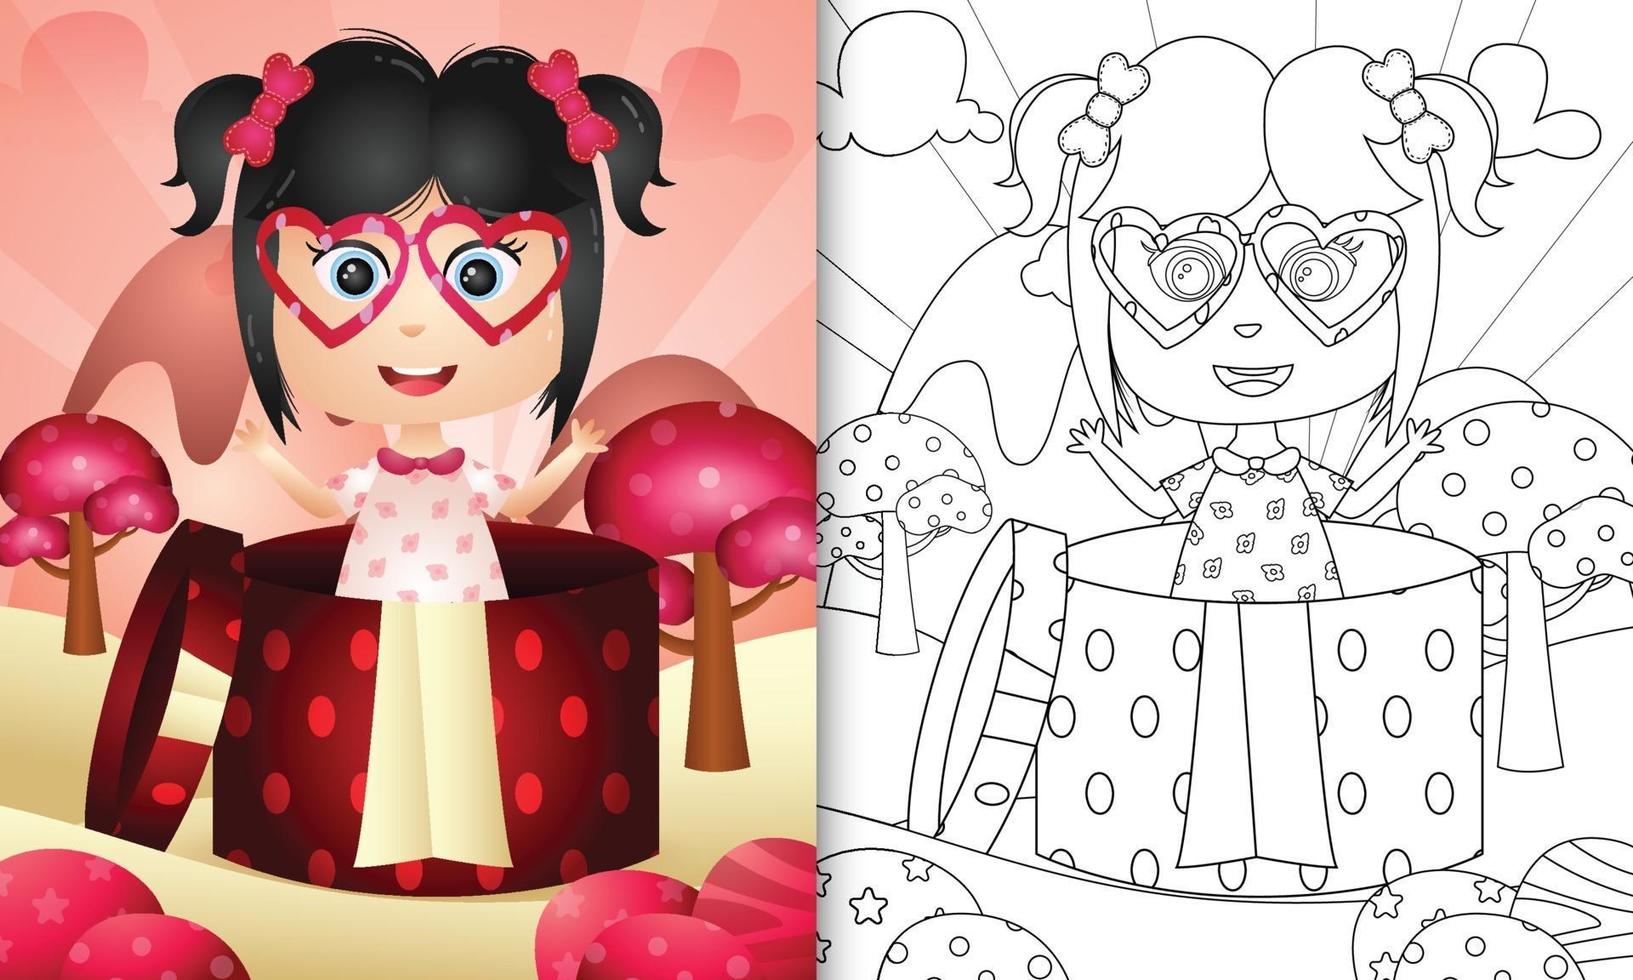 coloring book for kids with a cute girl in the gift box for valentine's day vector